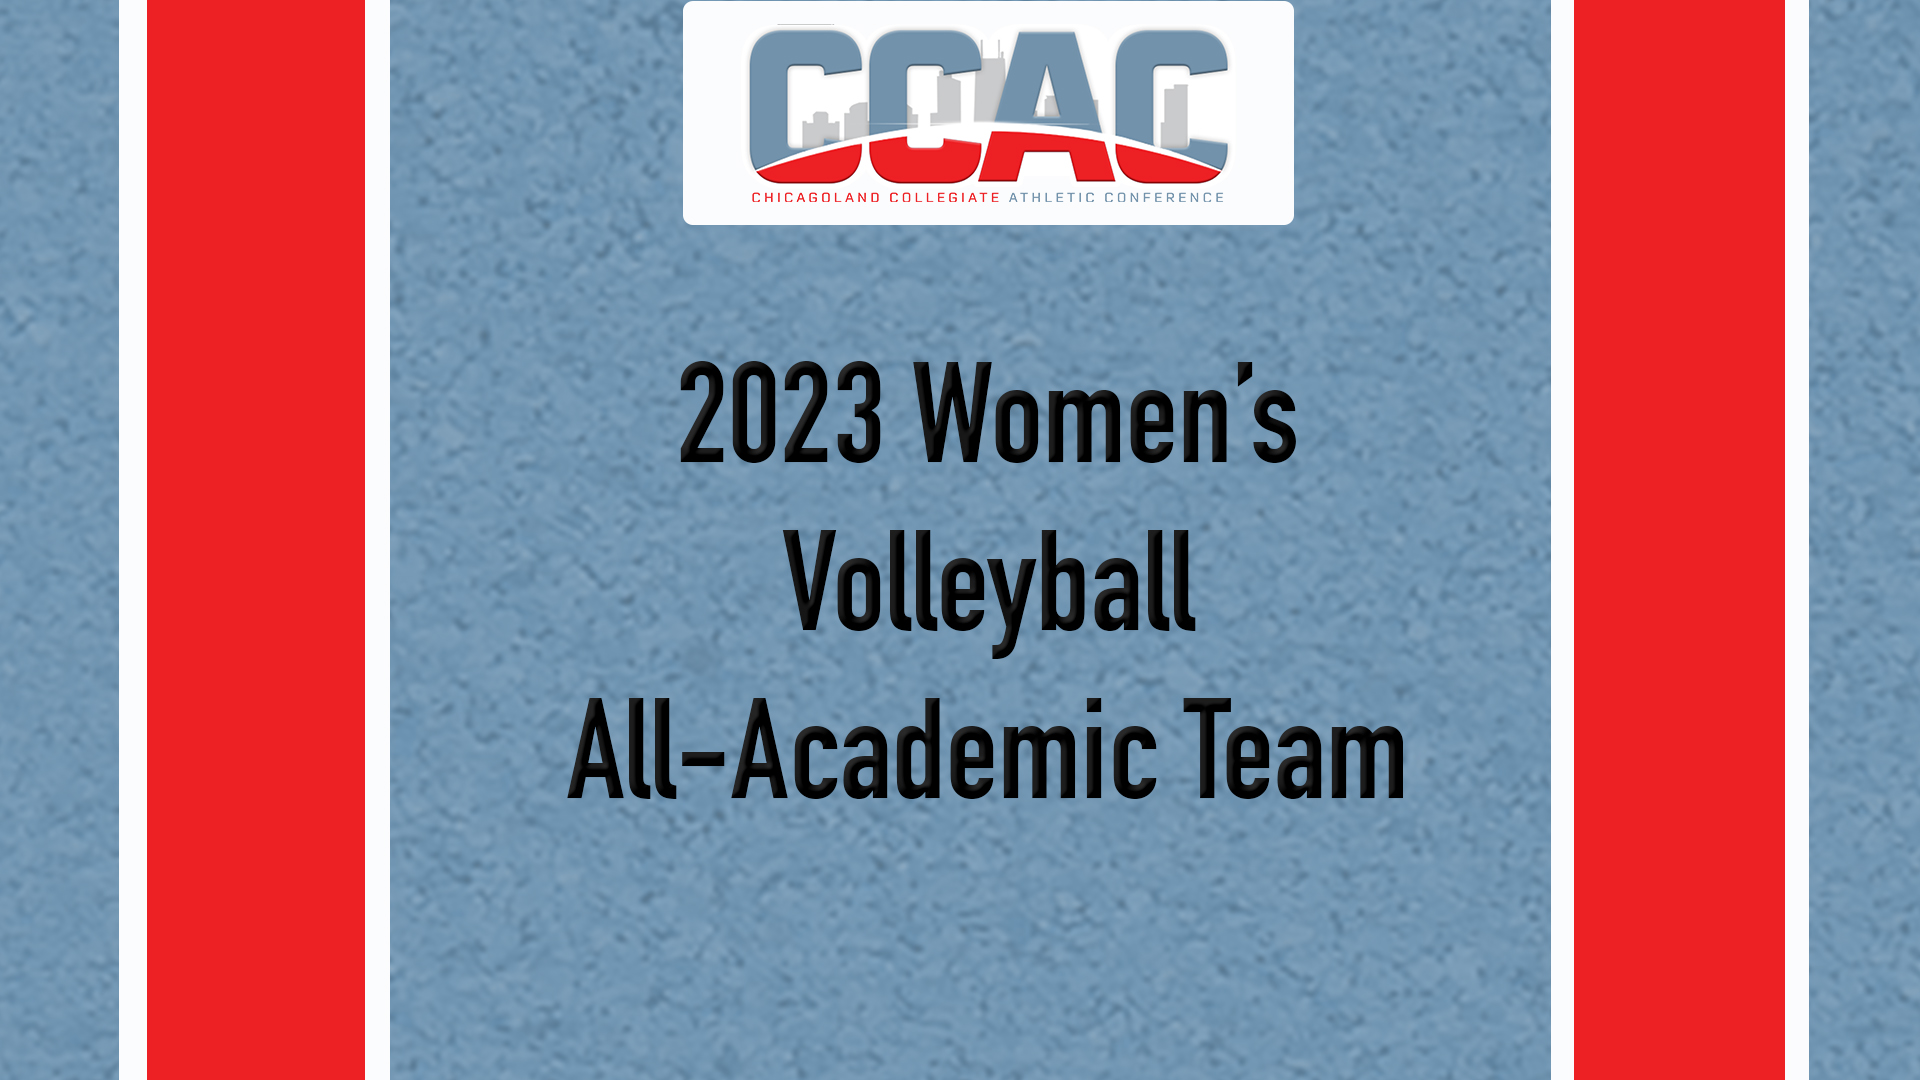 CCAC Announces Its 2023 Women's Volleyball All-Academic Team